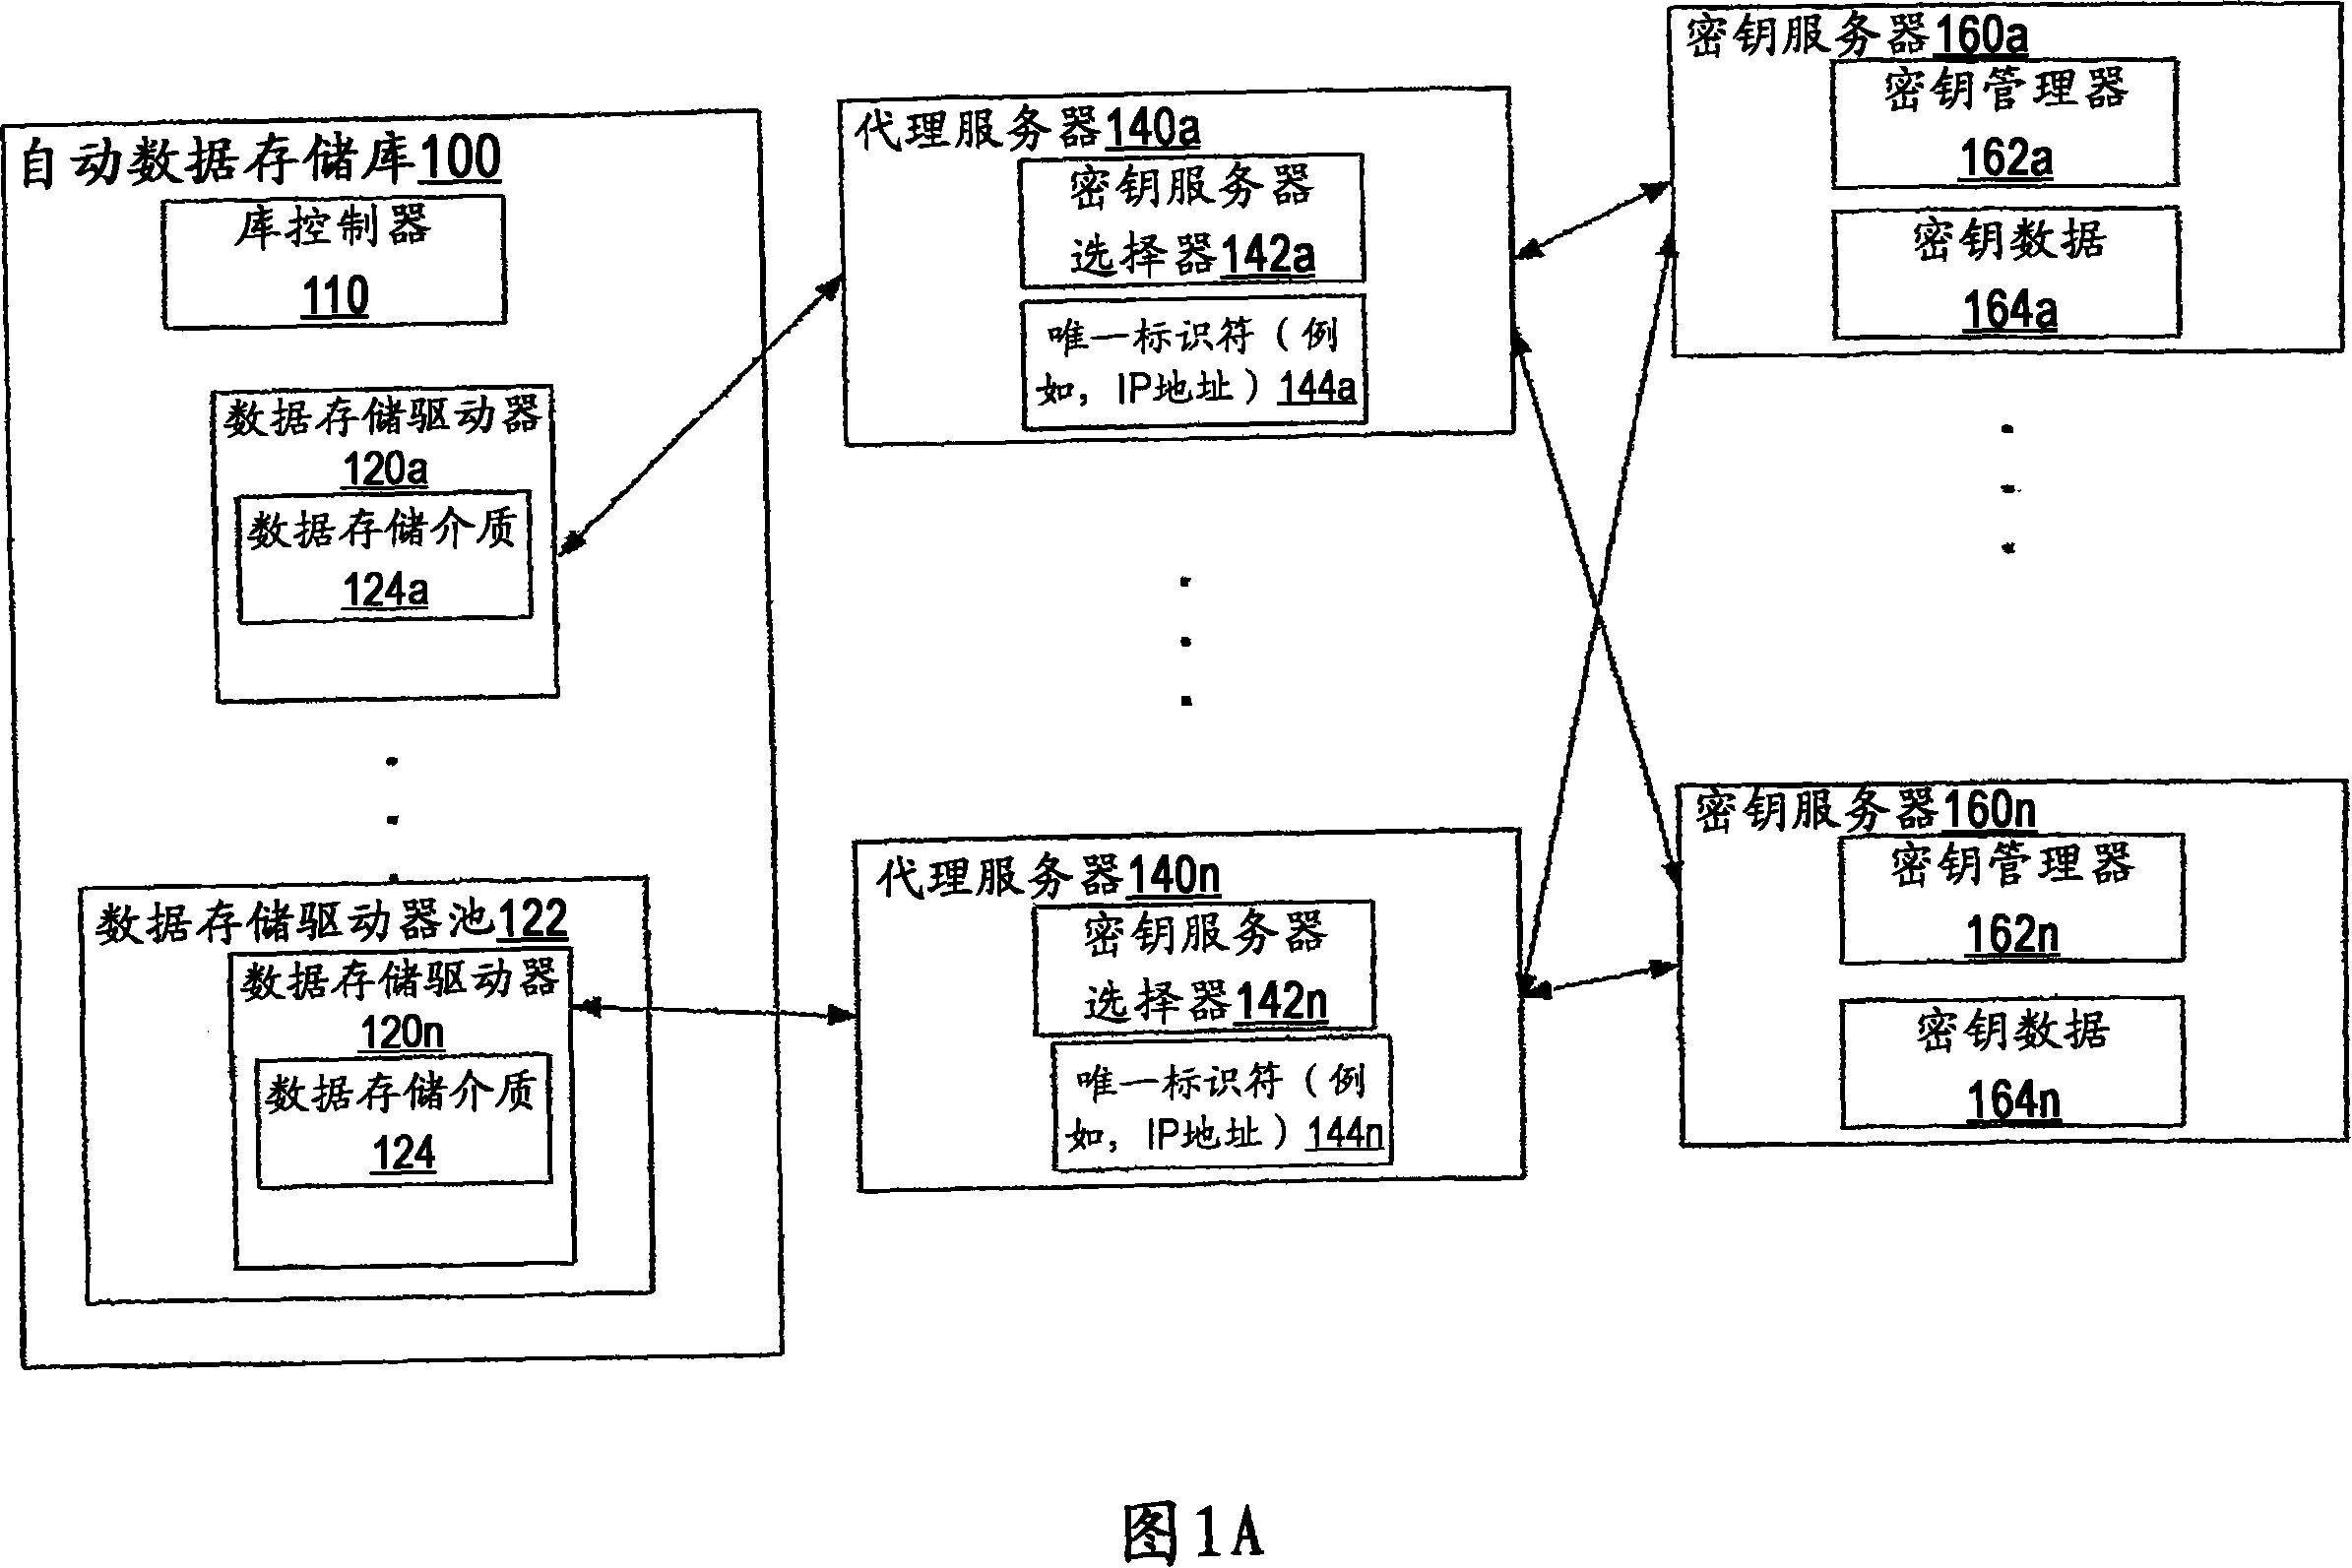 Method and system for key generation and retrieval using key servers